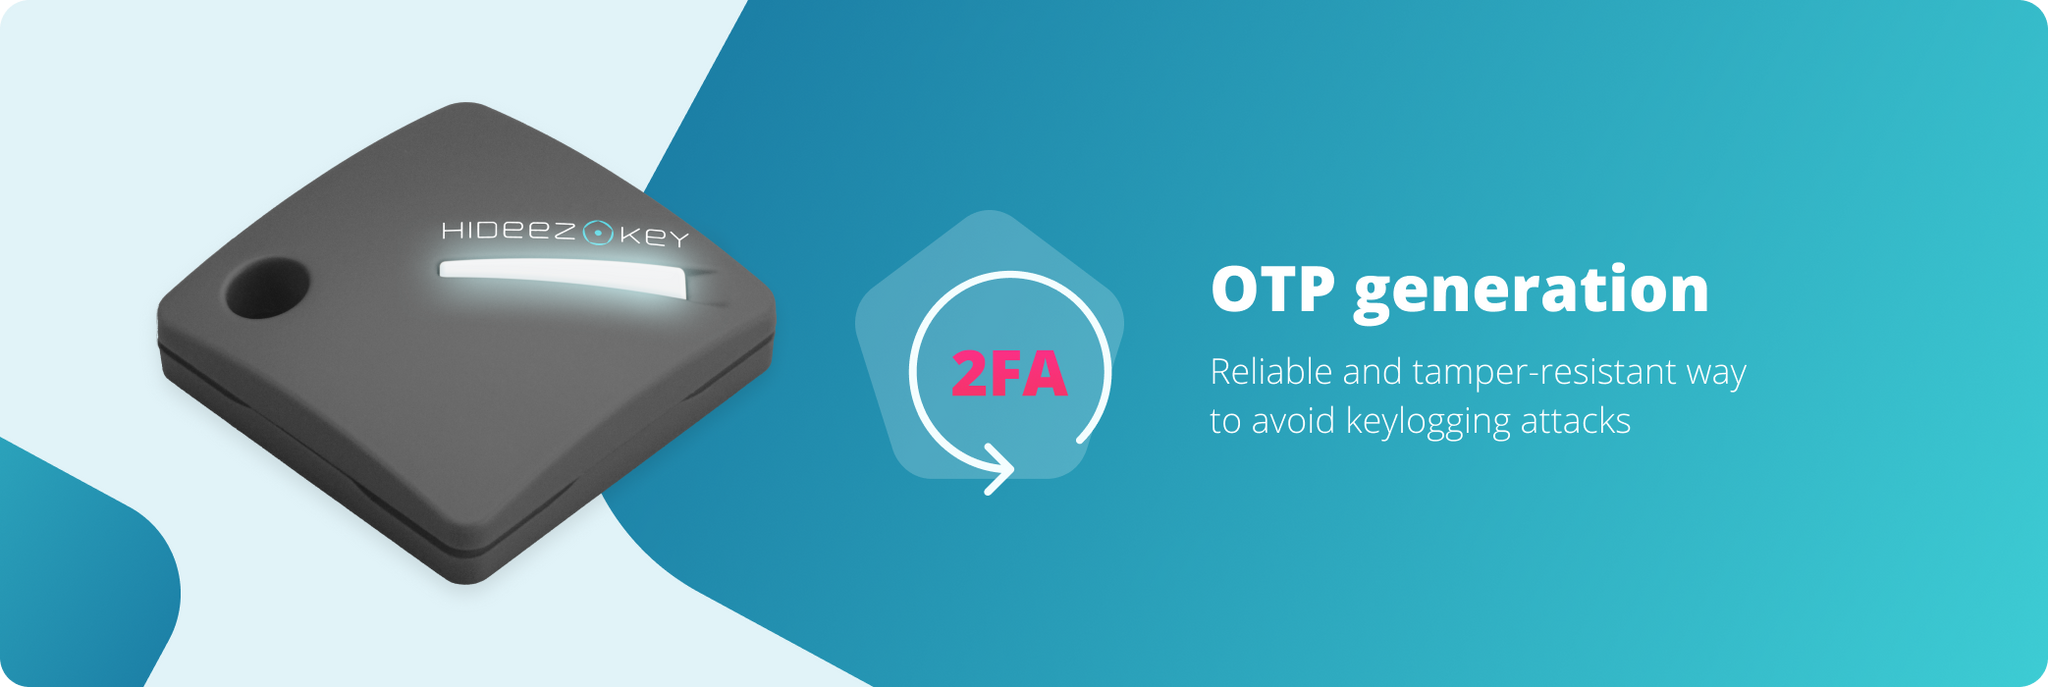 otp one time password generation